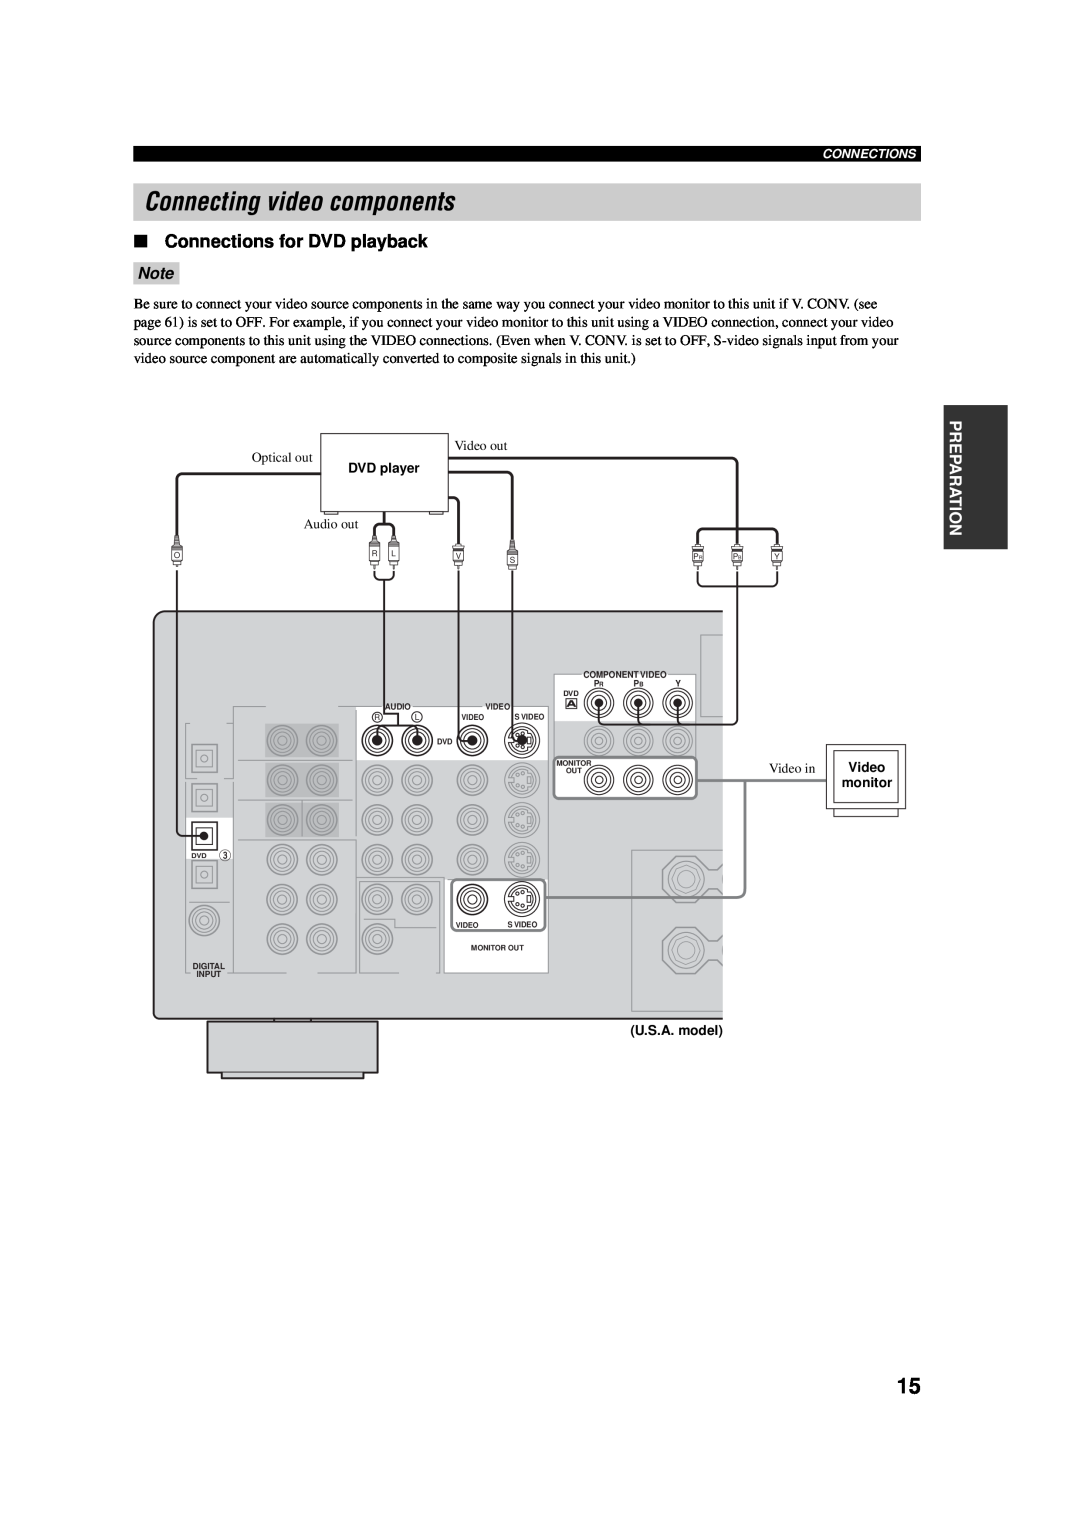 Yamaha AV Receiver owner manual Connecting video components, Connections for DVD playback, Video in, monitor 